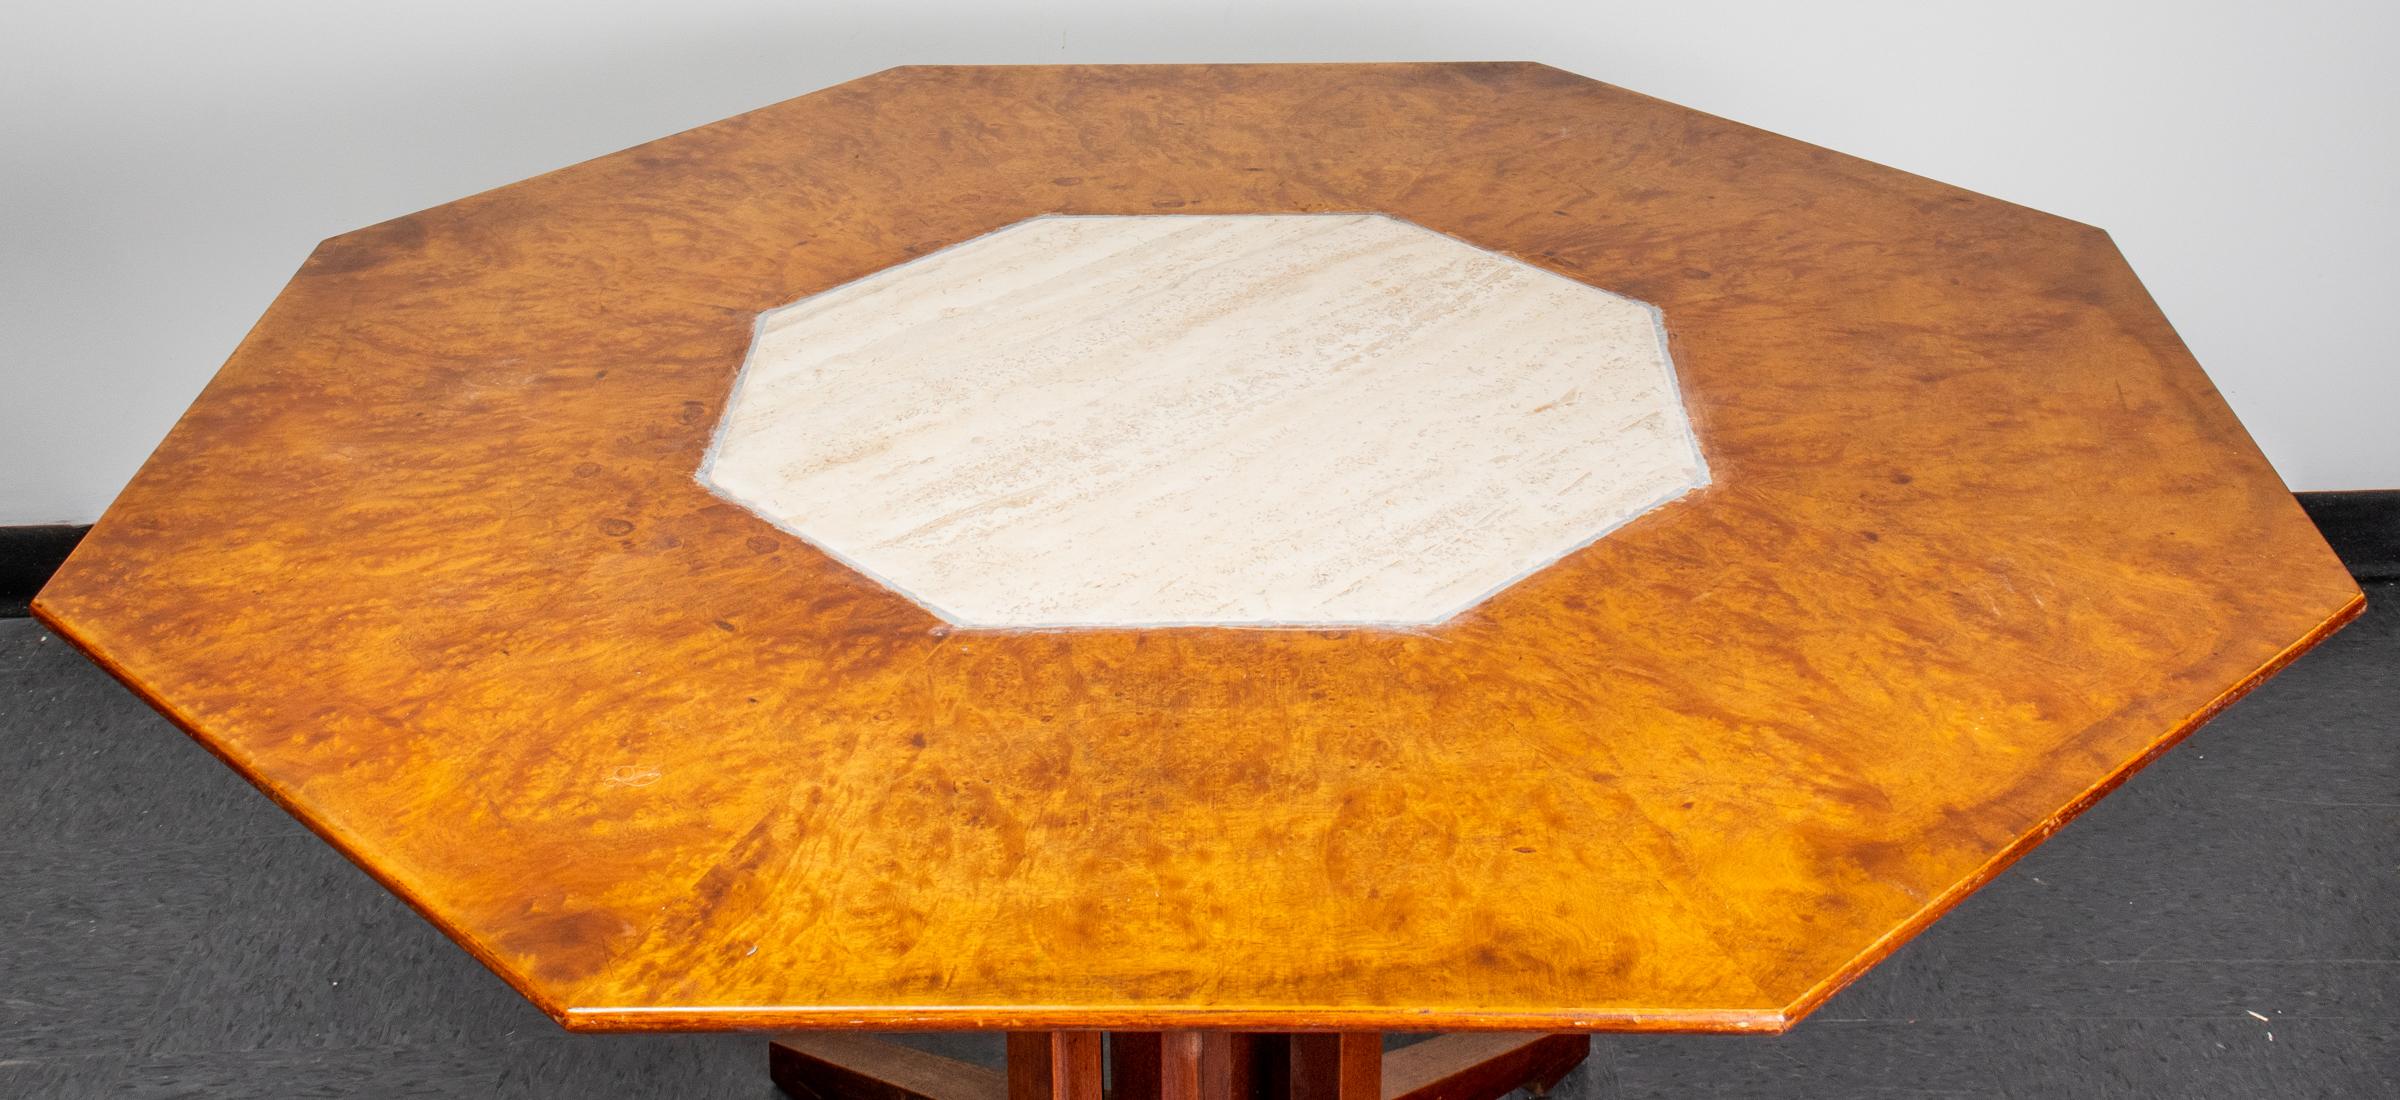 Mid-Century Modern octagonal burl wood dining table attributed to Harvey Probber, with inset travertine top. Measures: 28.75